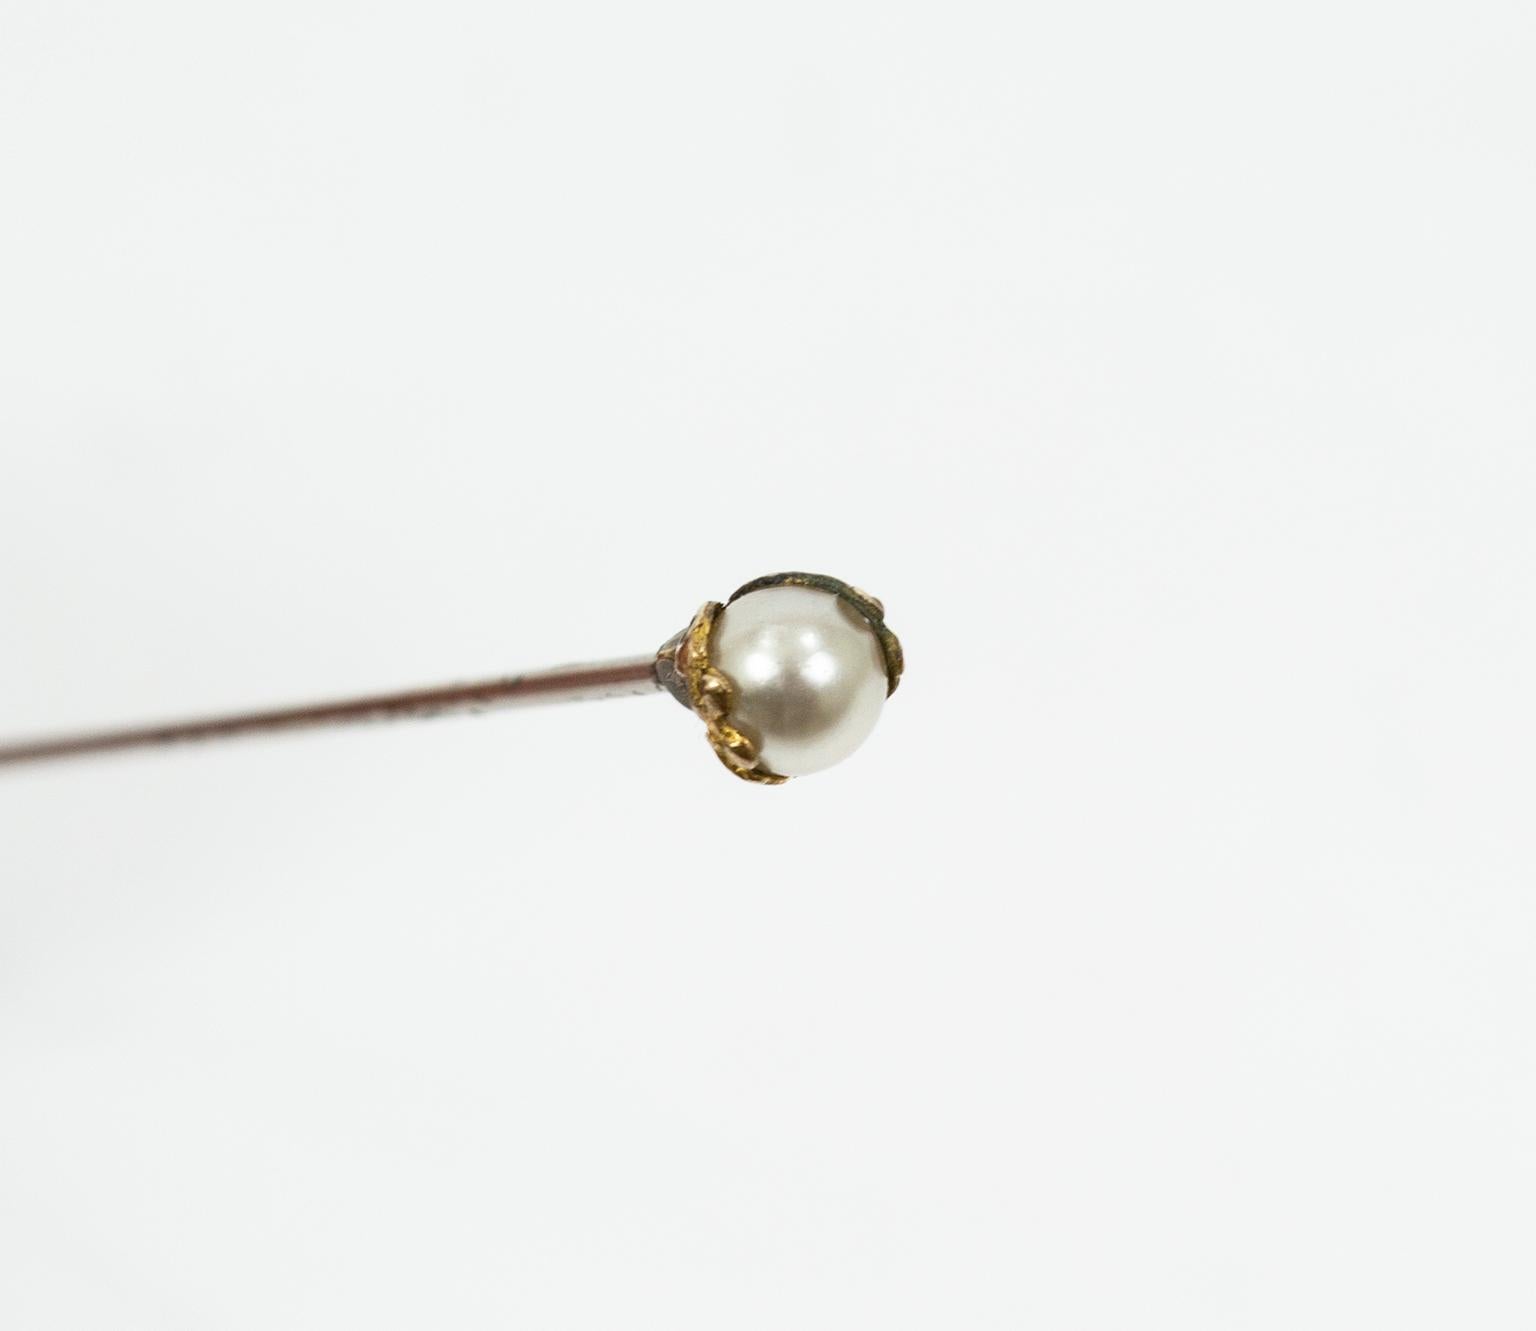 Ball Cut Victorian Art Nouveau Hat Pin with Cultured Pearl in Gold Talon, 1900s